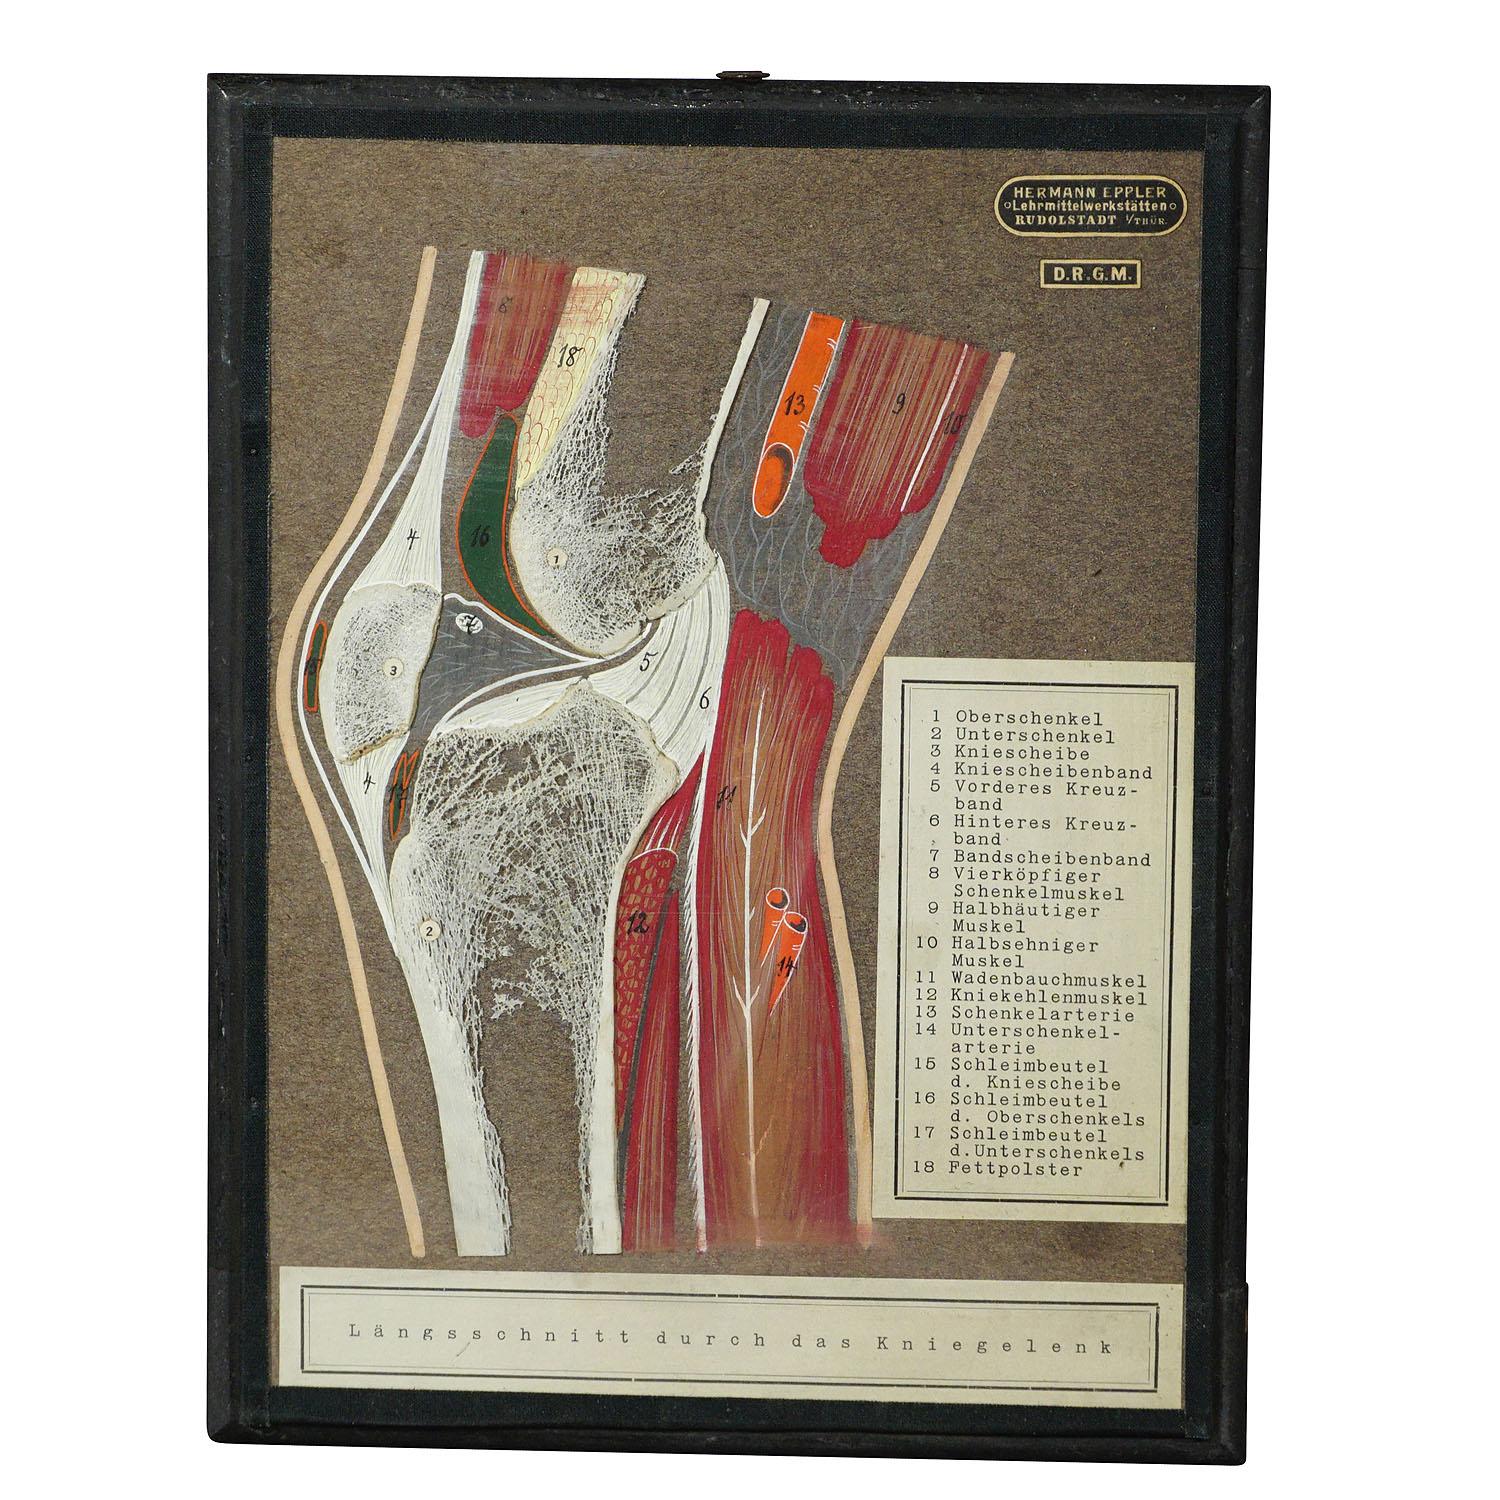 An antique demonstration model of a longitudinal bone cut of the knee joint. Genuine bone mounted on cardboard with handpainted structure of bursae and tendons. With German explanation. Published by Hermann Eppler, Lehrmittelanstalt Rudolstadt ca.